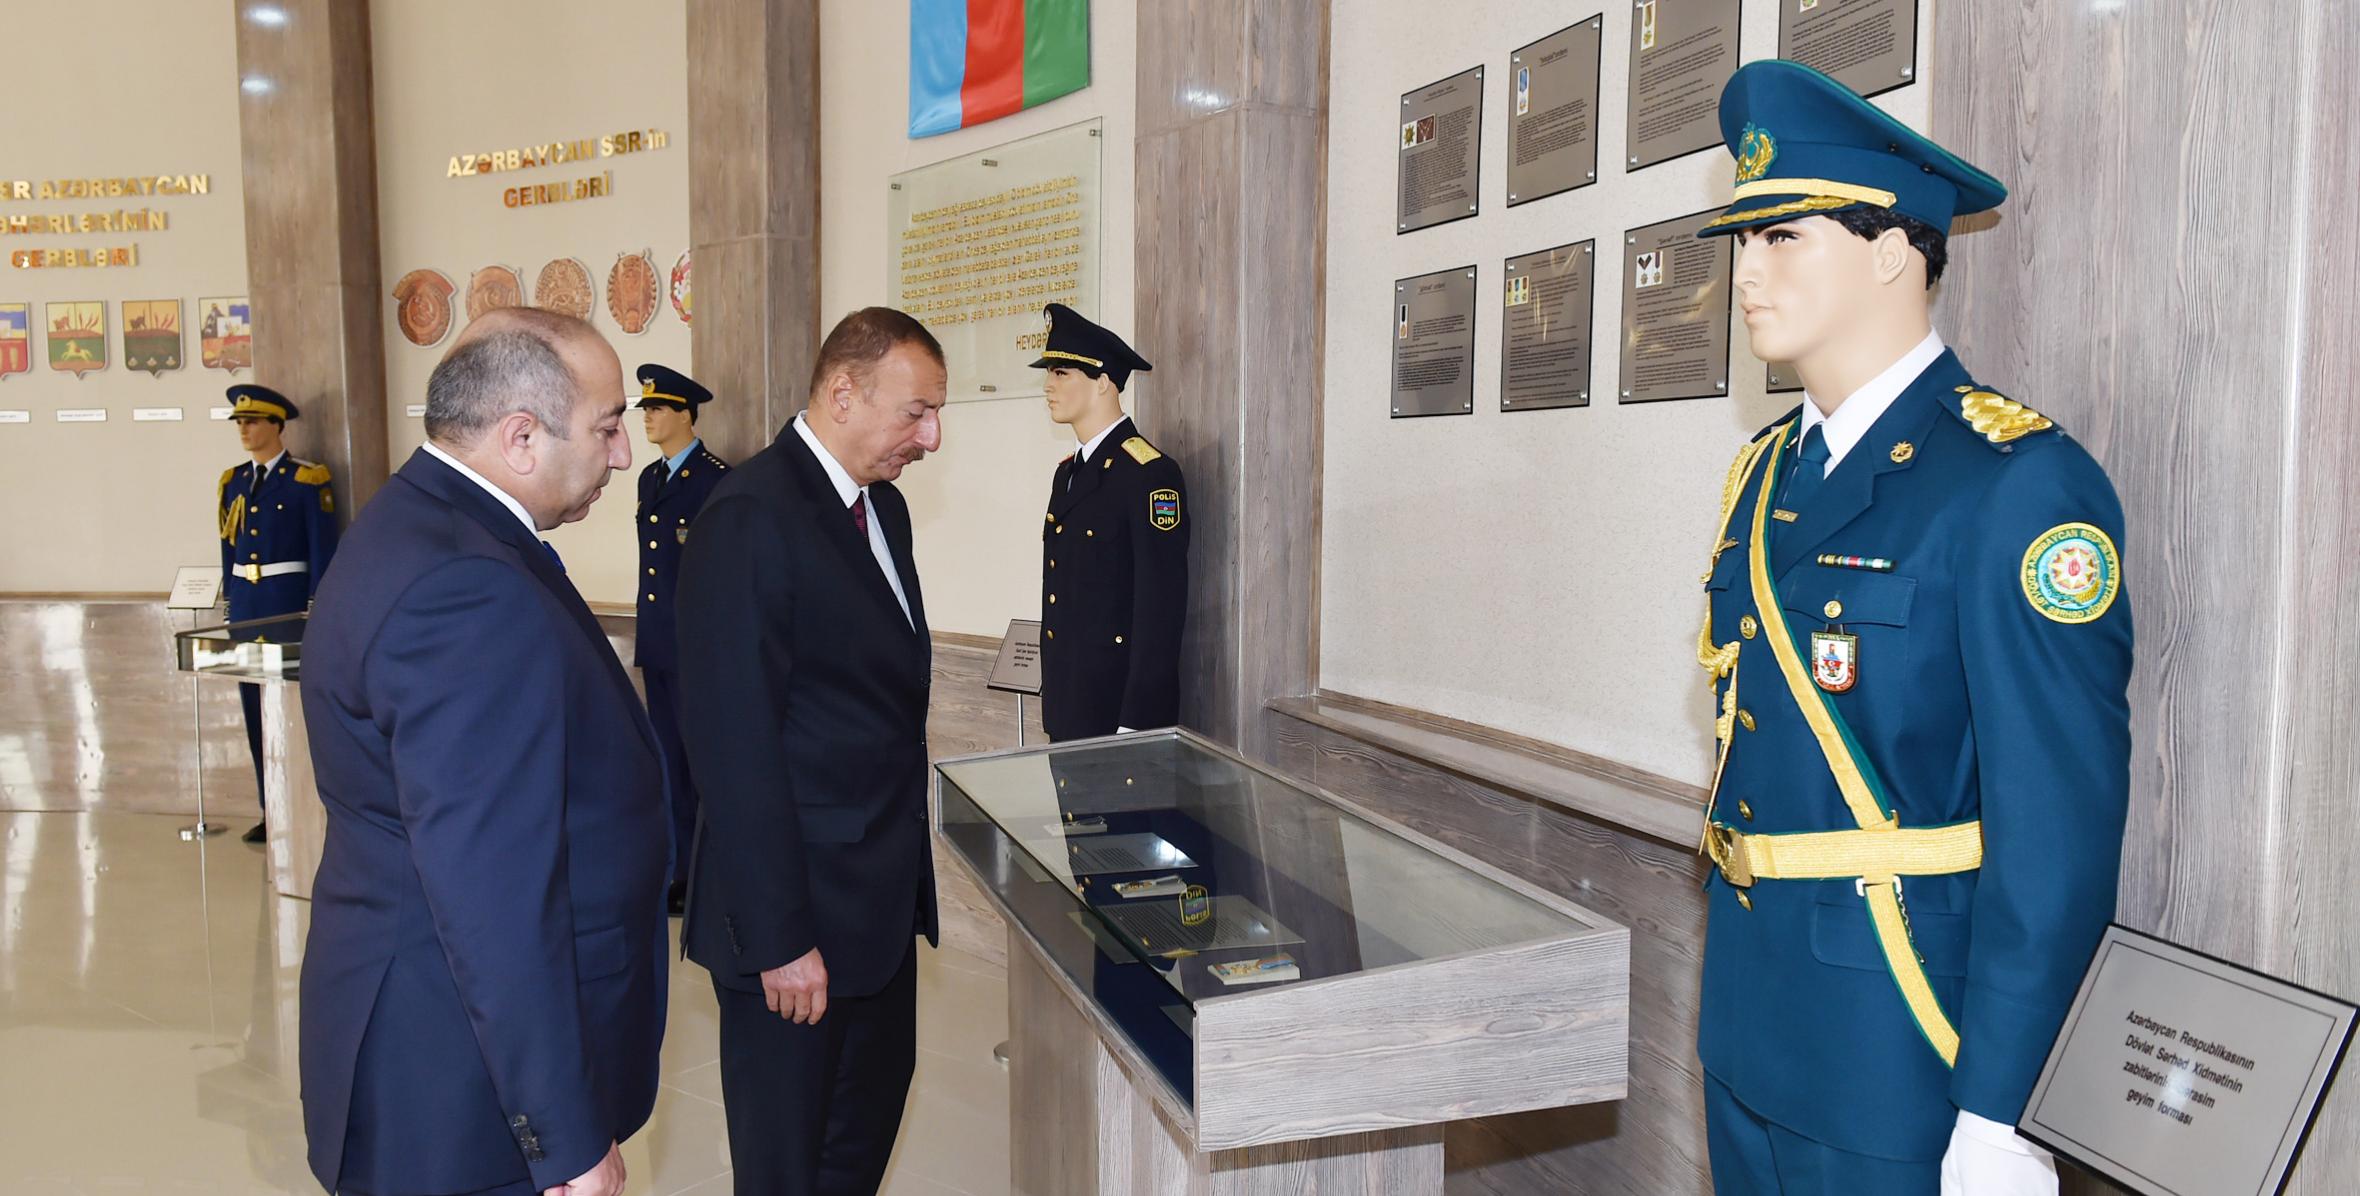 Ilham Aliyev attended the opening of the Flag Square in Kurdamir